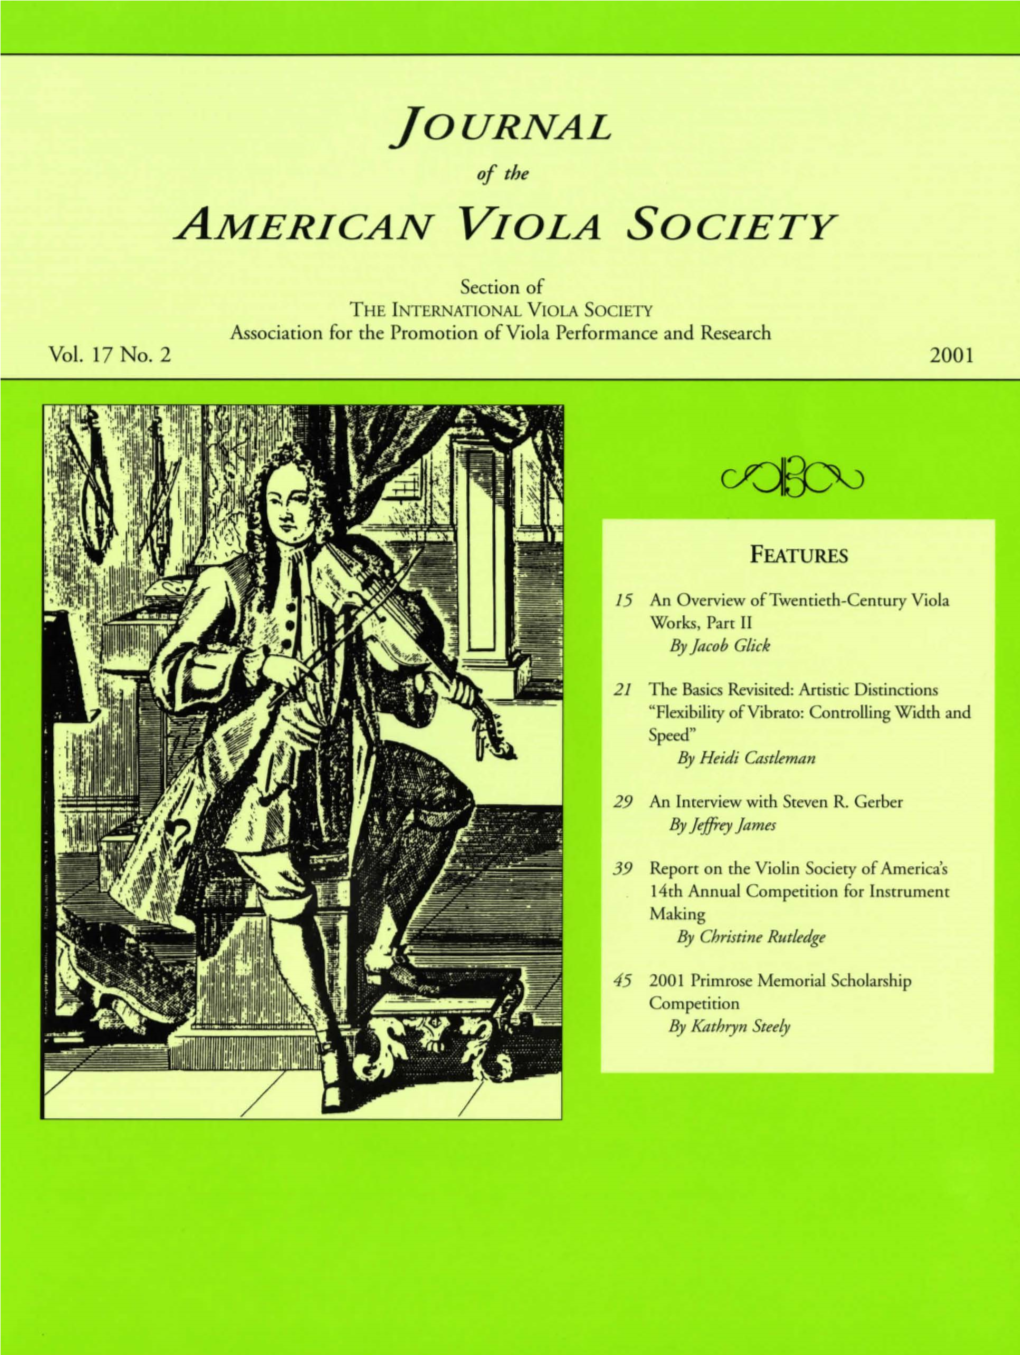 Journal of the American Viola Society Volume 17 No. 2, 2001